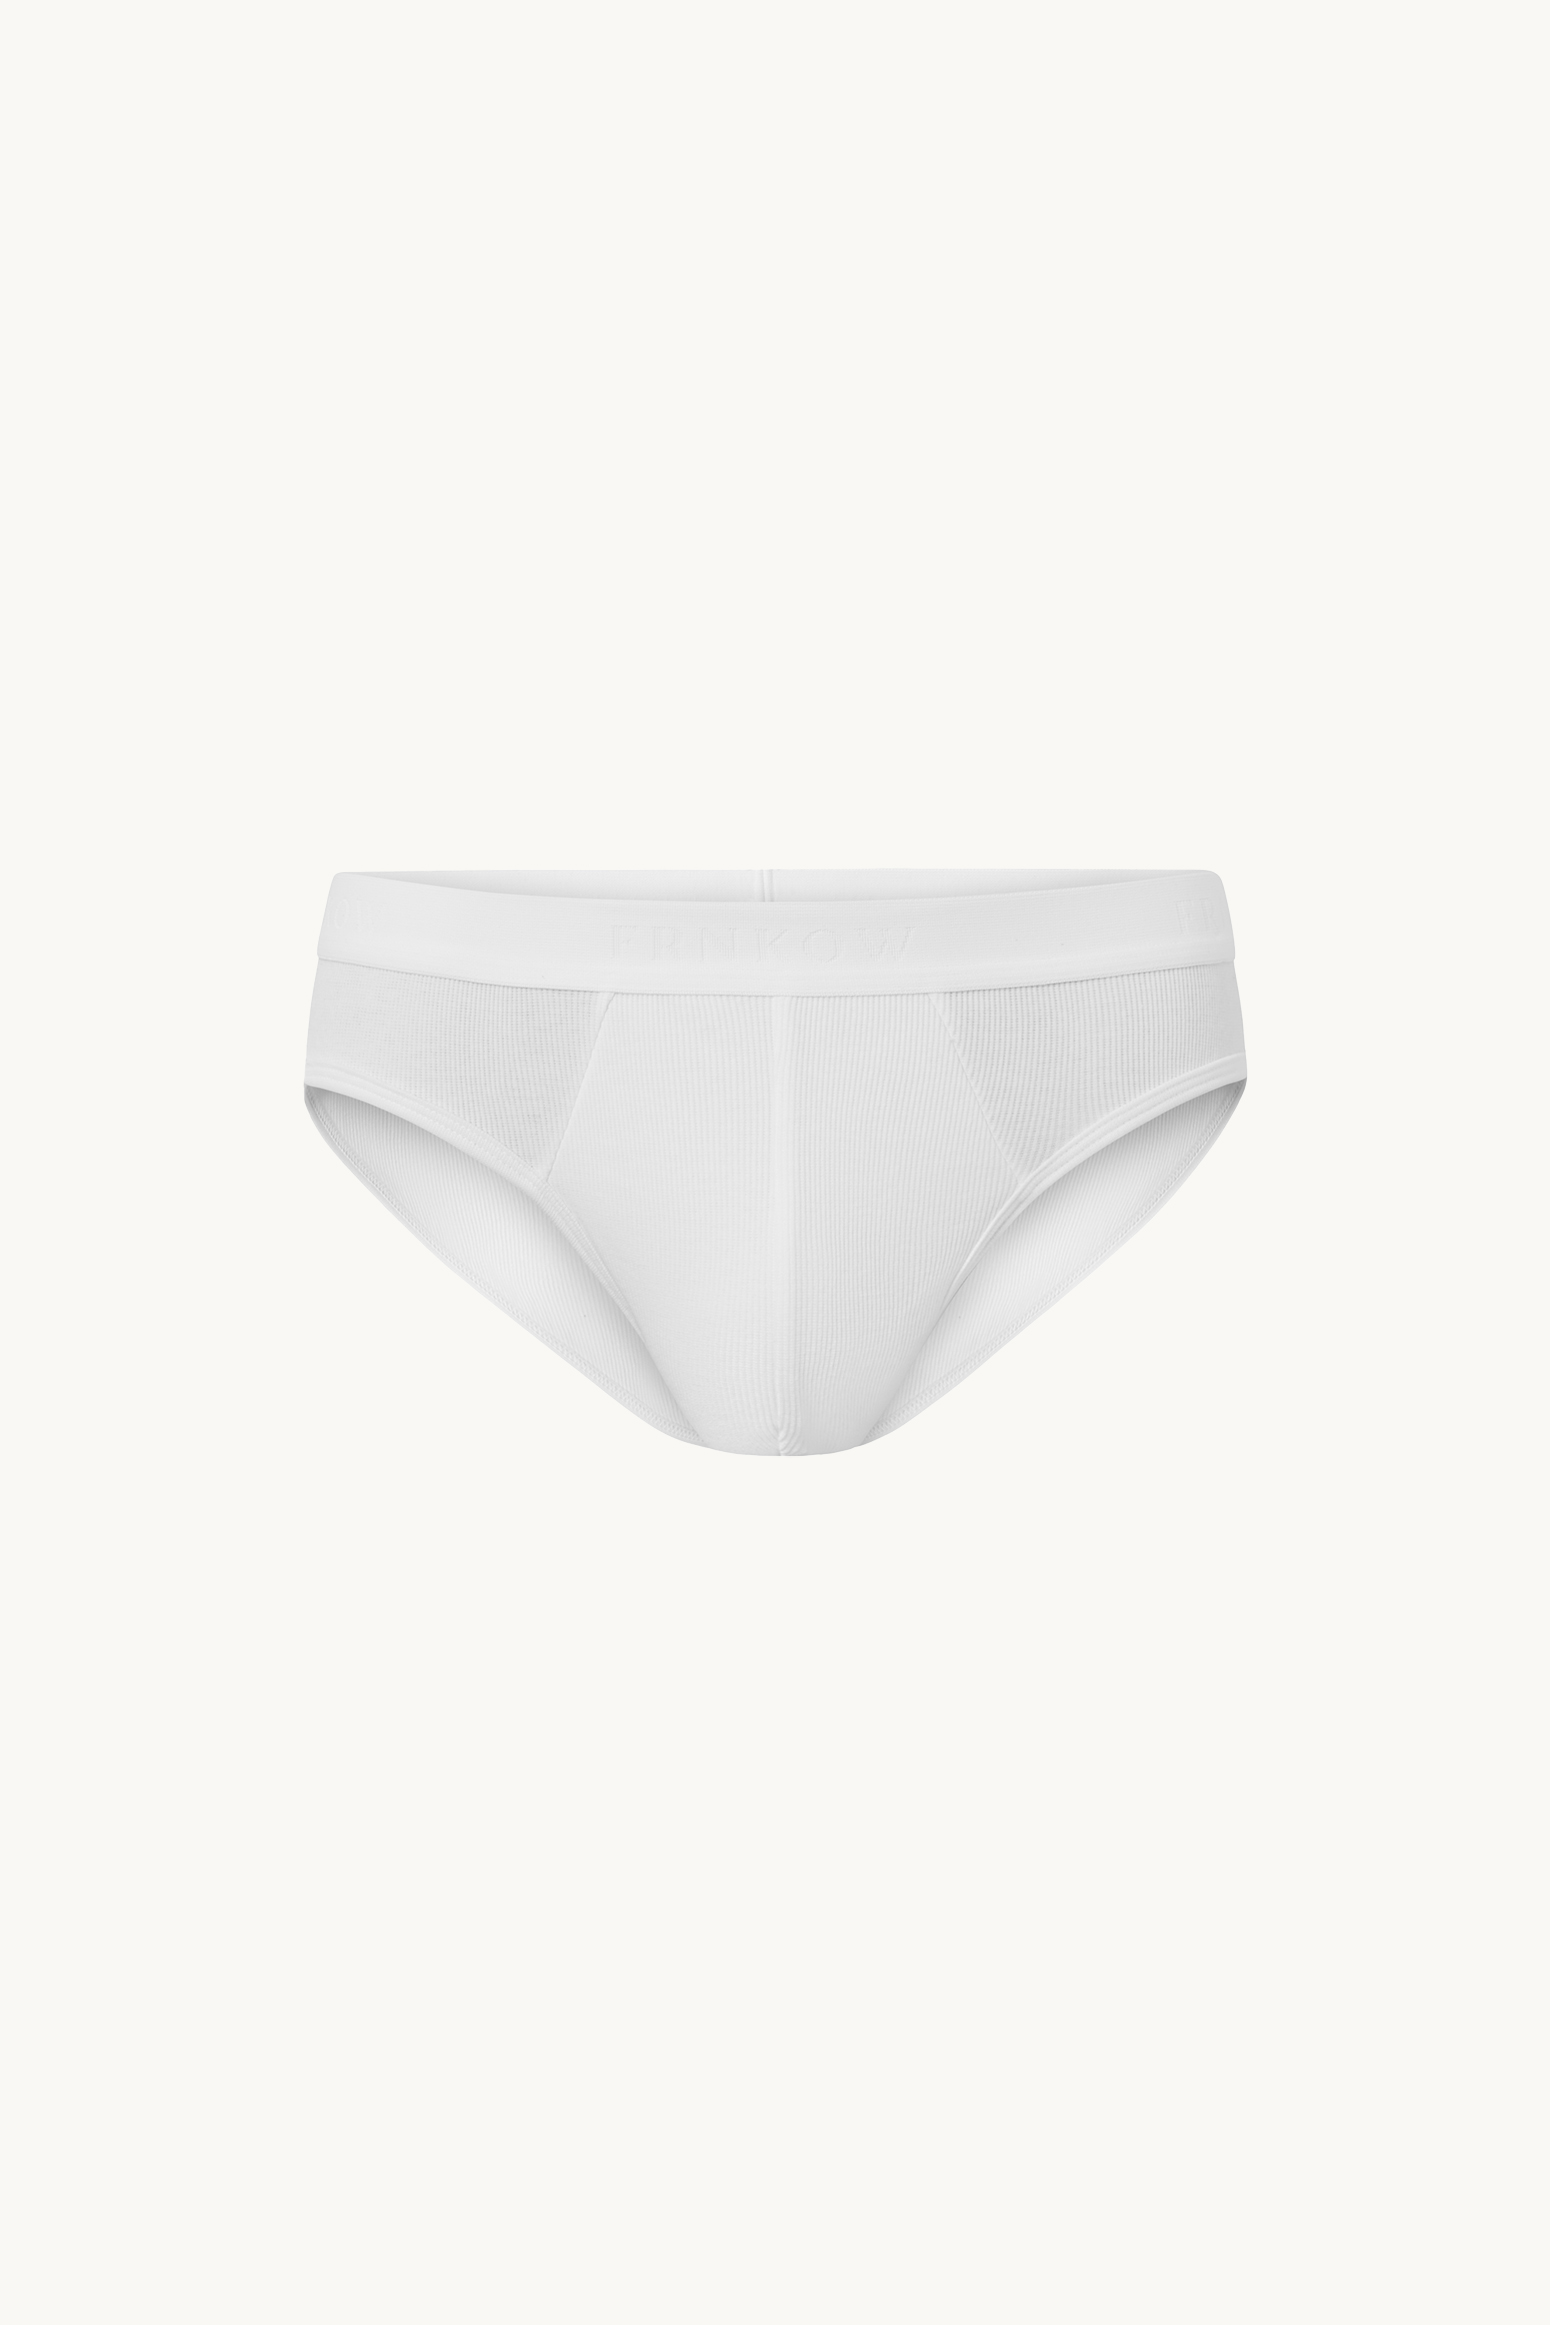 https://frnkow.com/wp-content/uploads/2022/06/FRNKOW_double_ribbed_briefs_white_double_rib_doppelripp_2.jpg